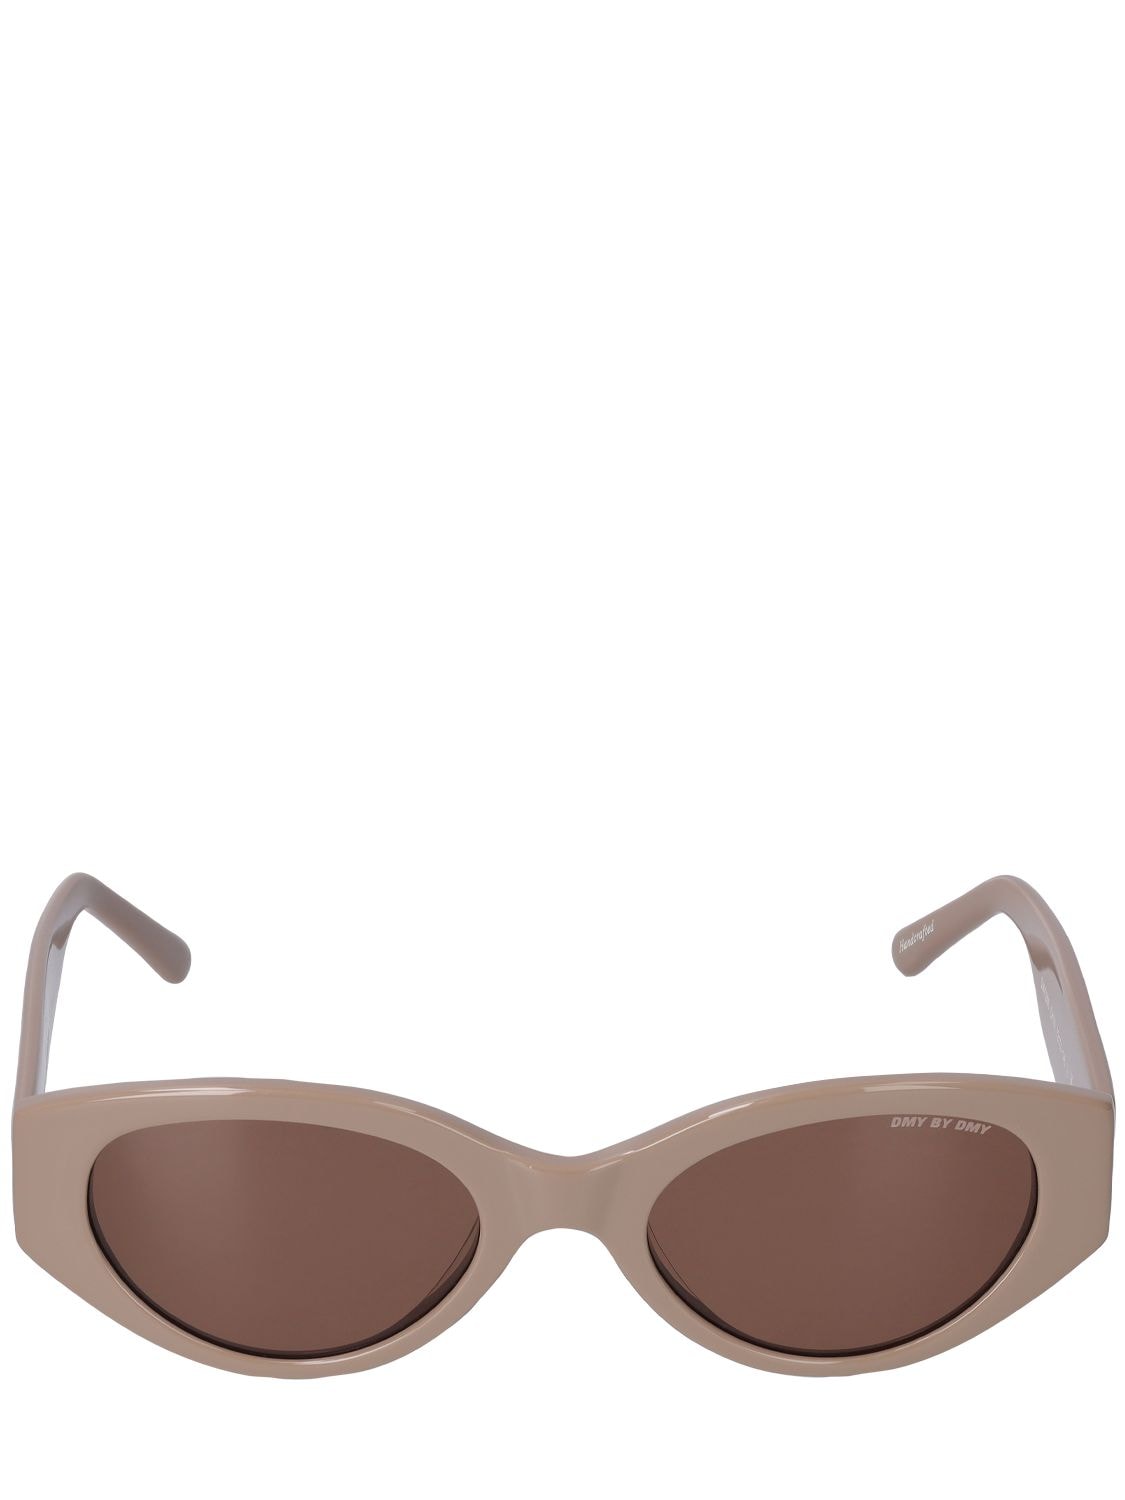 DMY BY DMY Quin Round Acetate Sunglasses